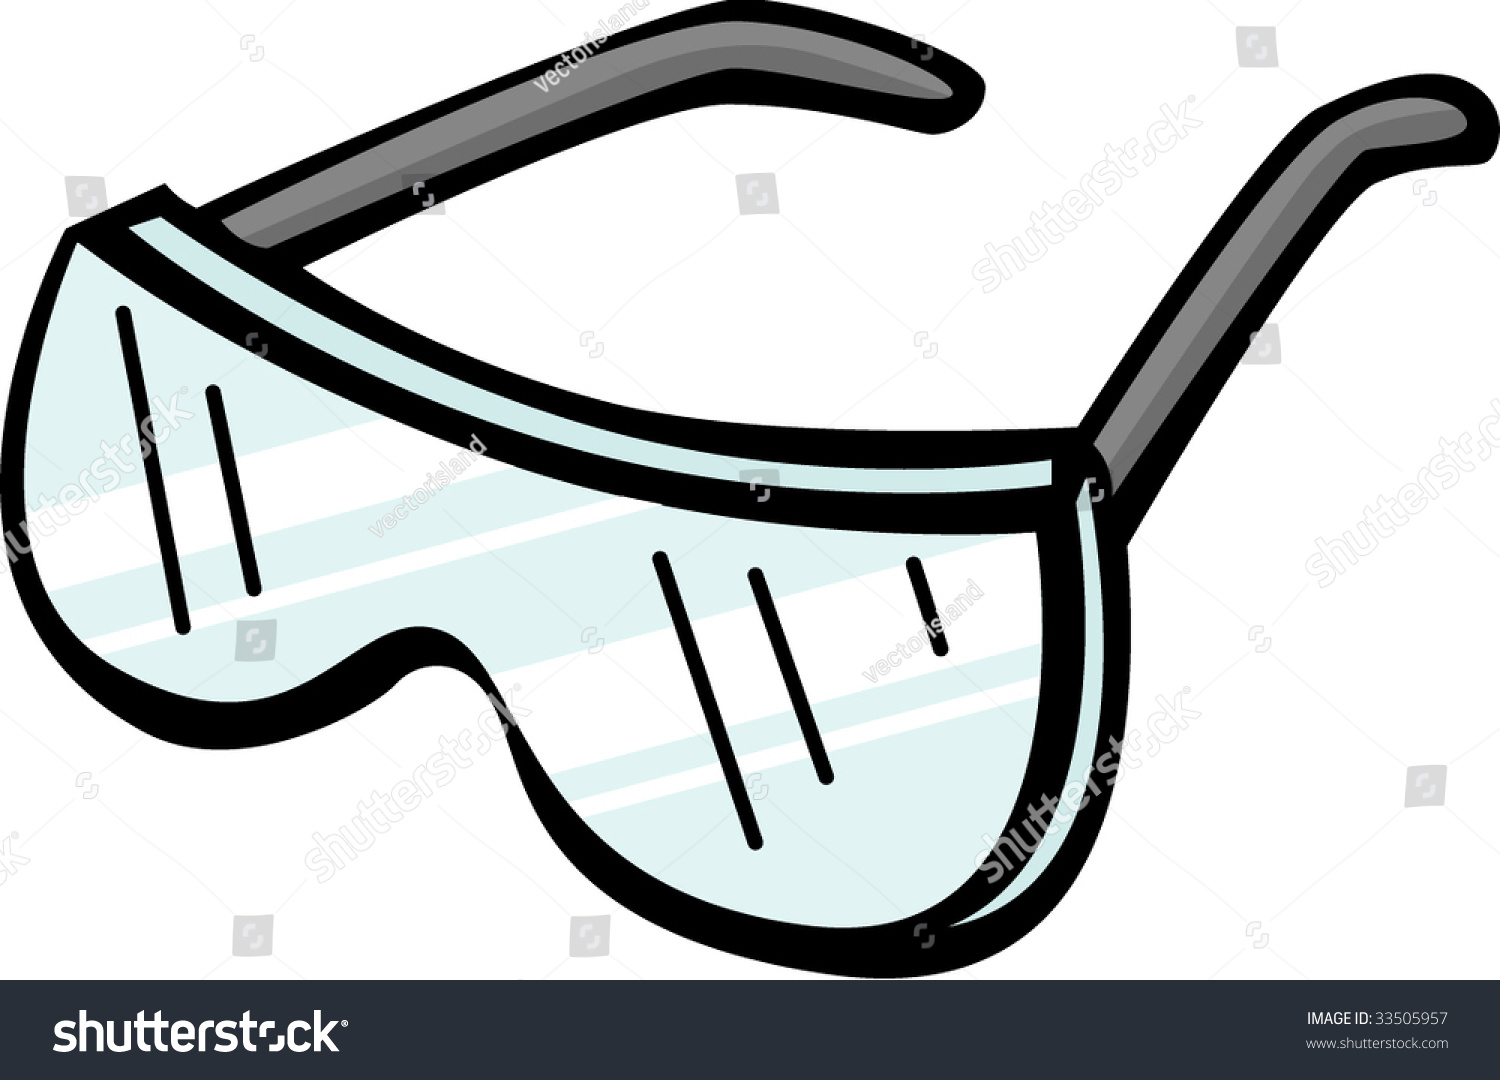 Safety Goggles Stock Vector (Royalty Free) 33505957 Shutterstock.